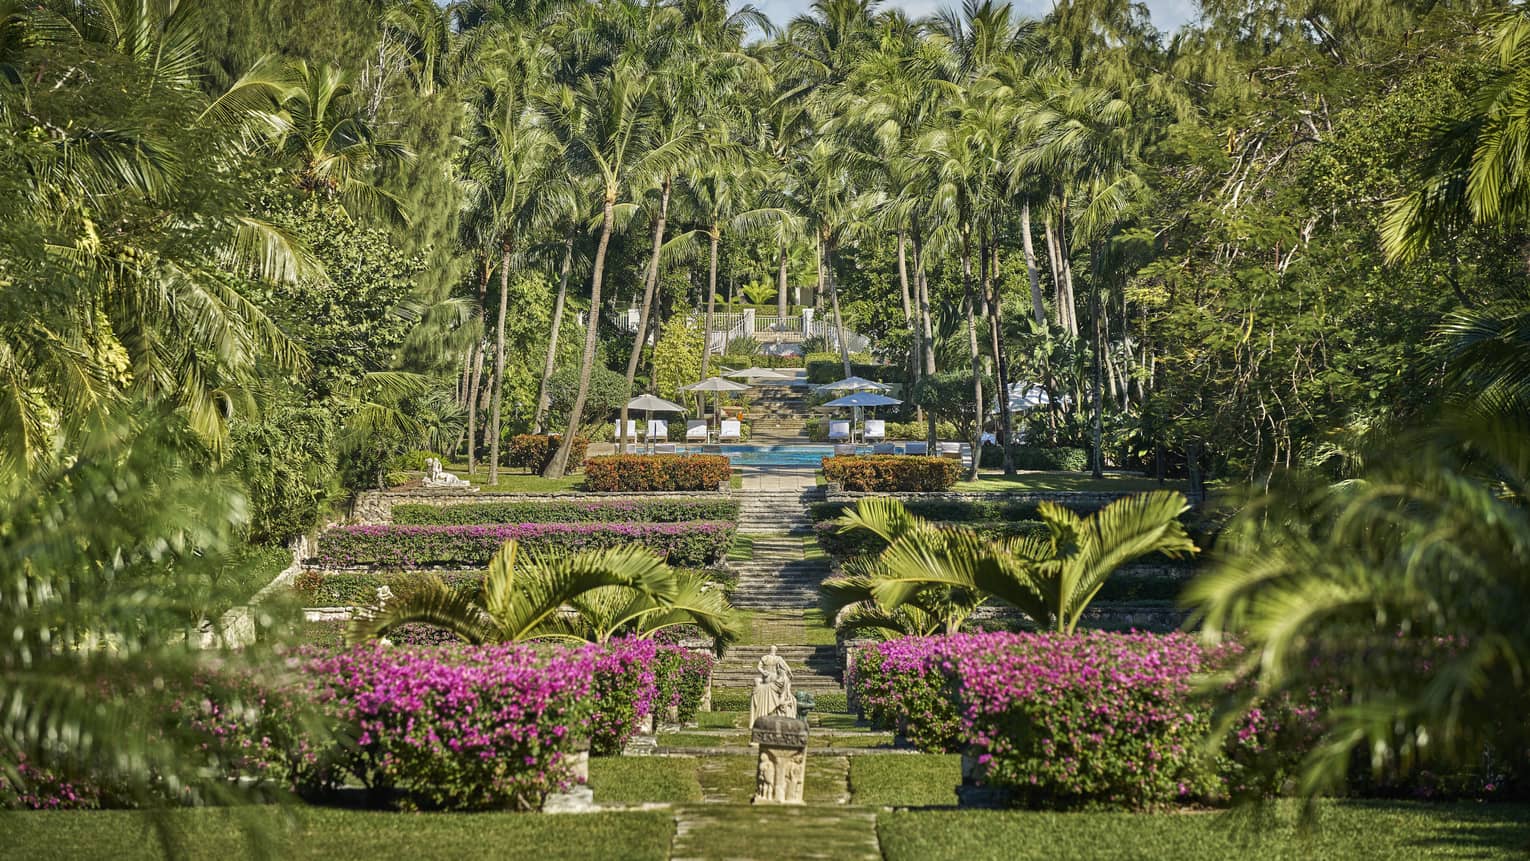 A large garden with pink flowers and tall palm trees.